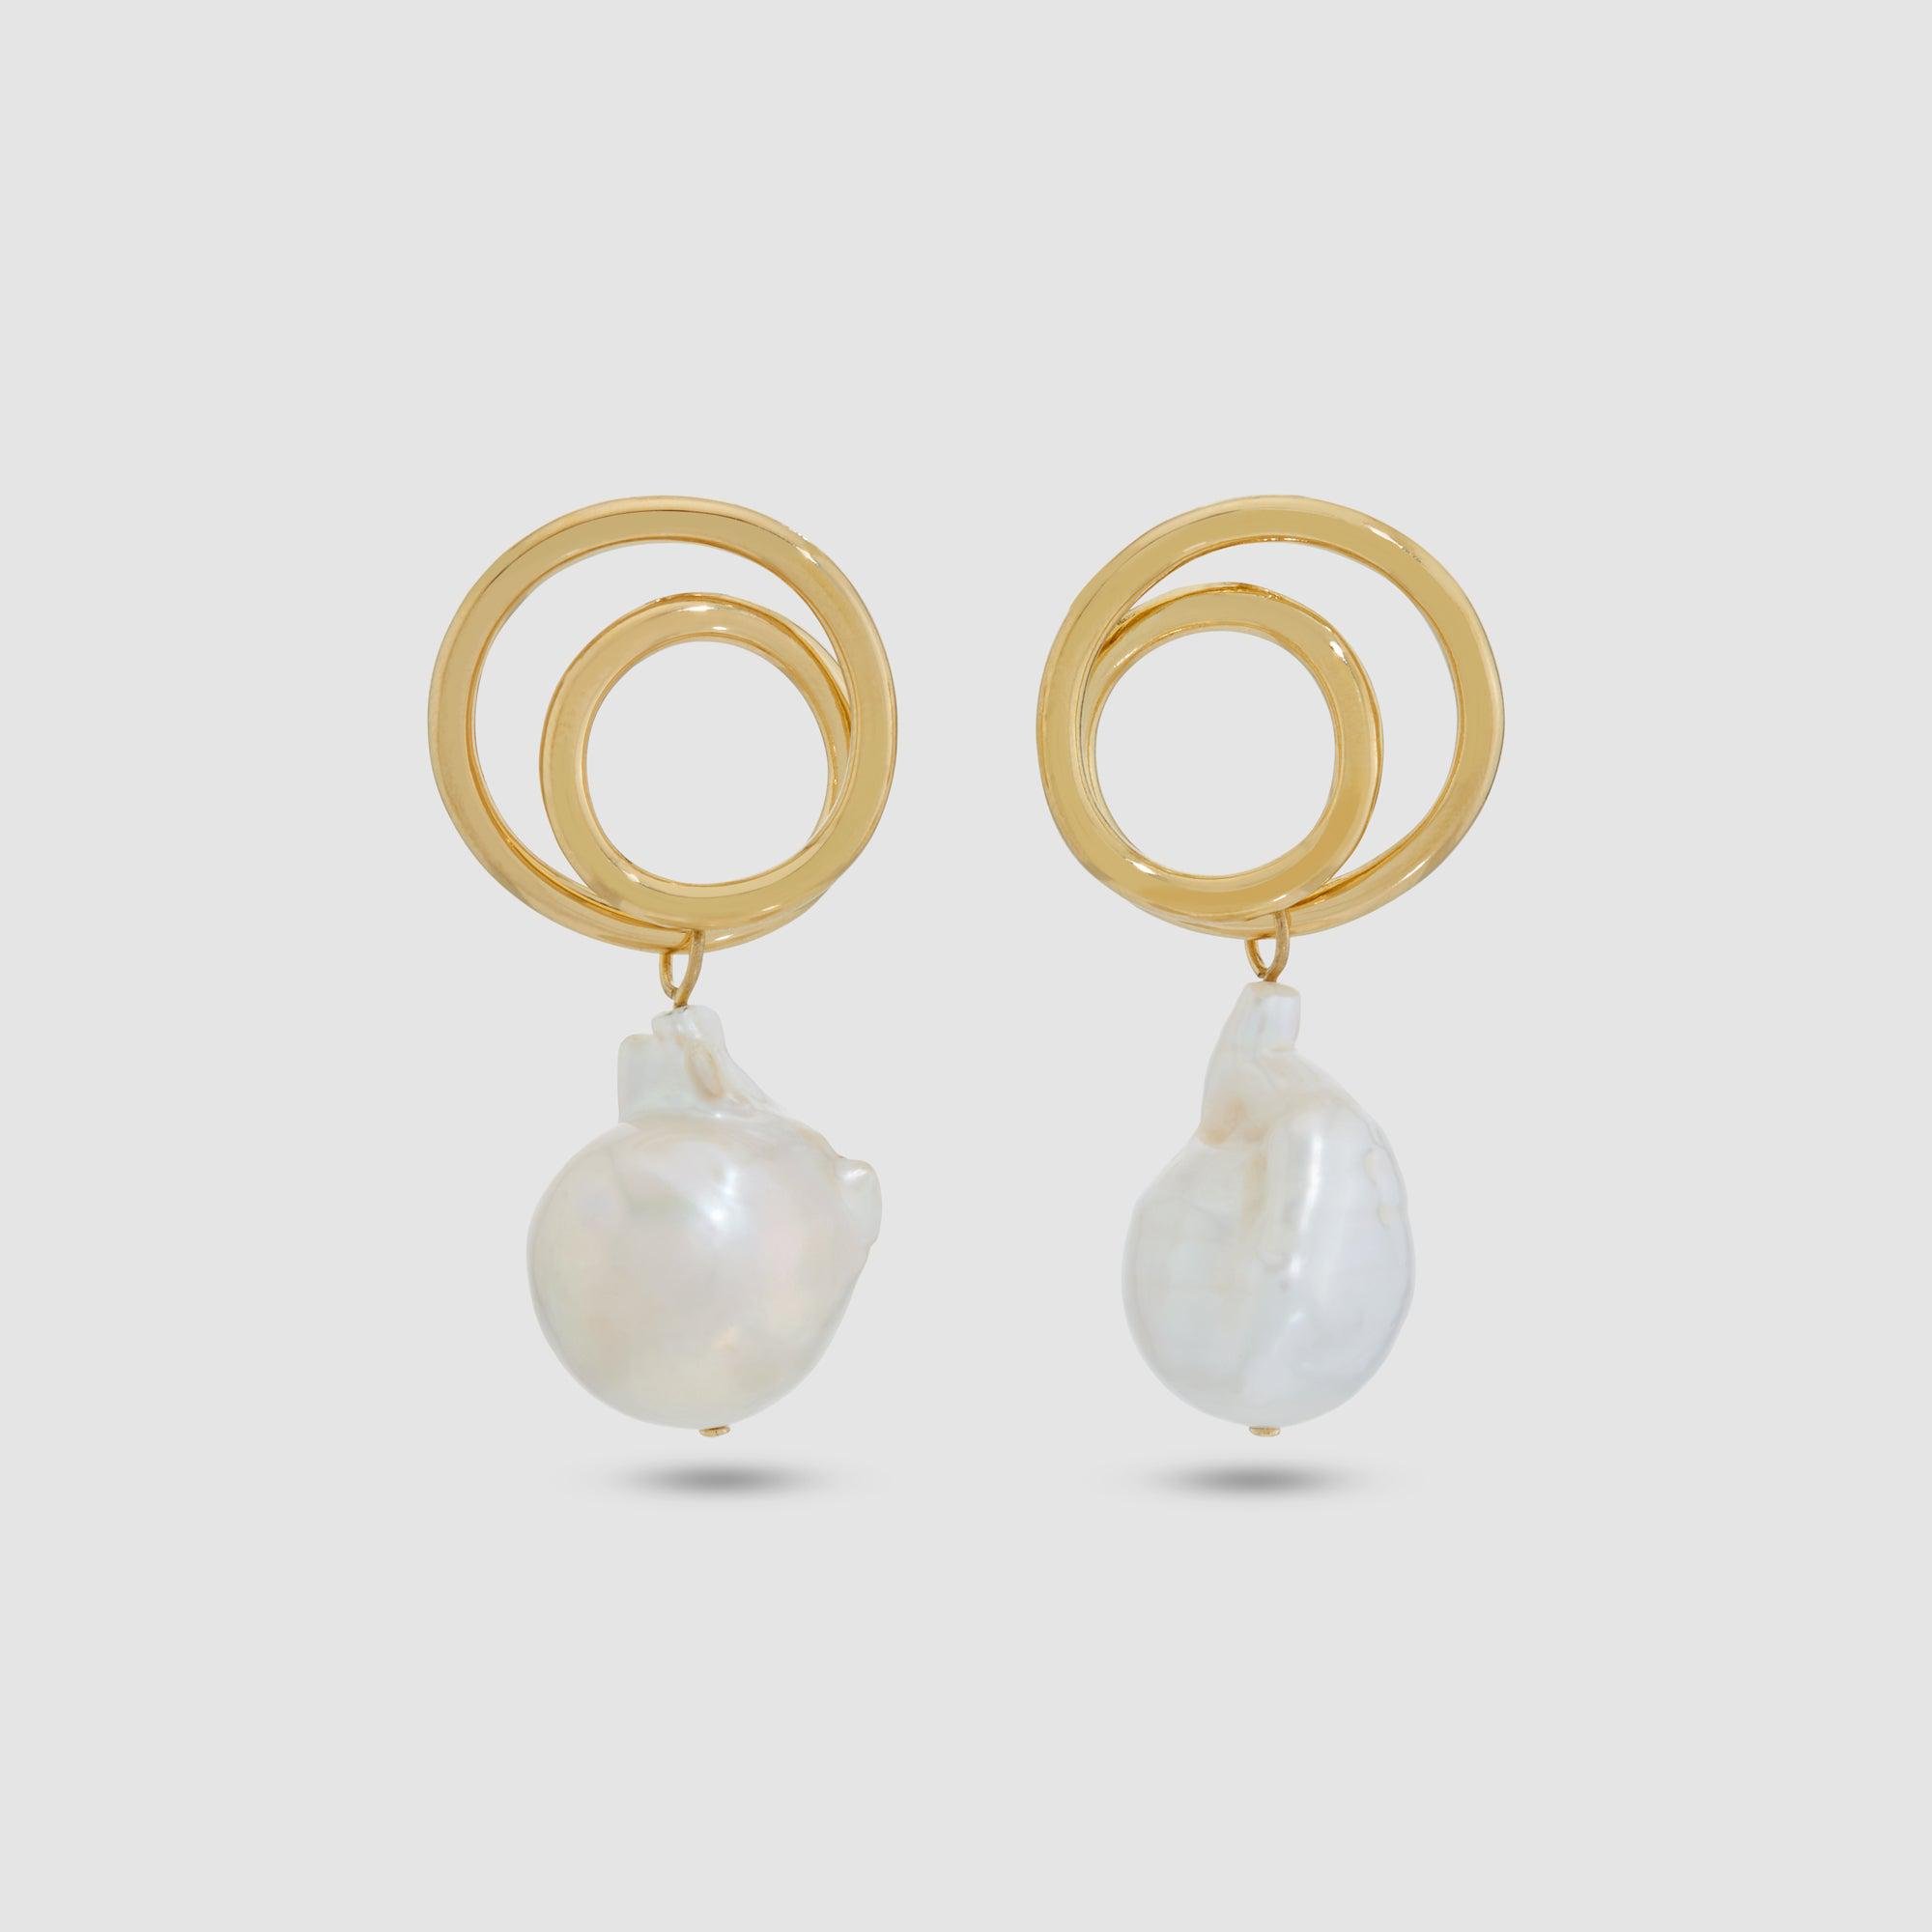 Completedworks - Spiral Earrings with Fresh Water Pearls by COMPLETEDWORKS